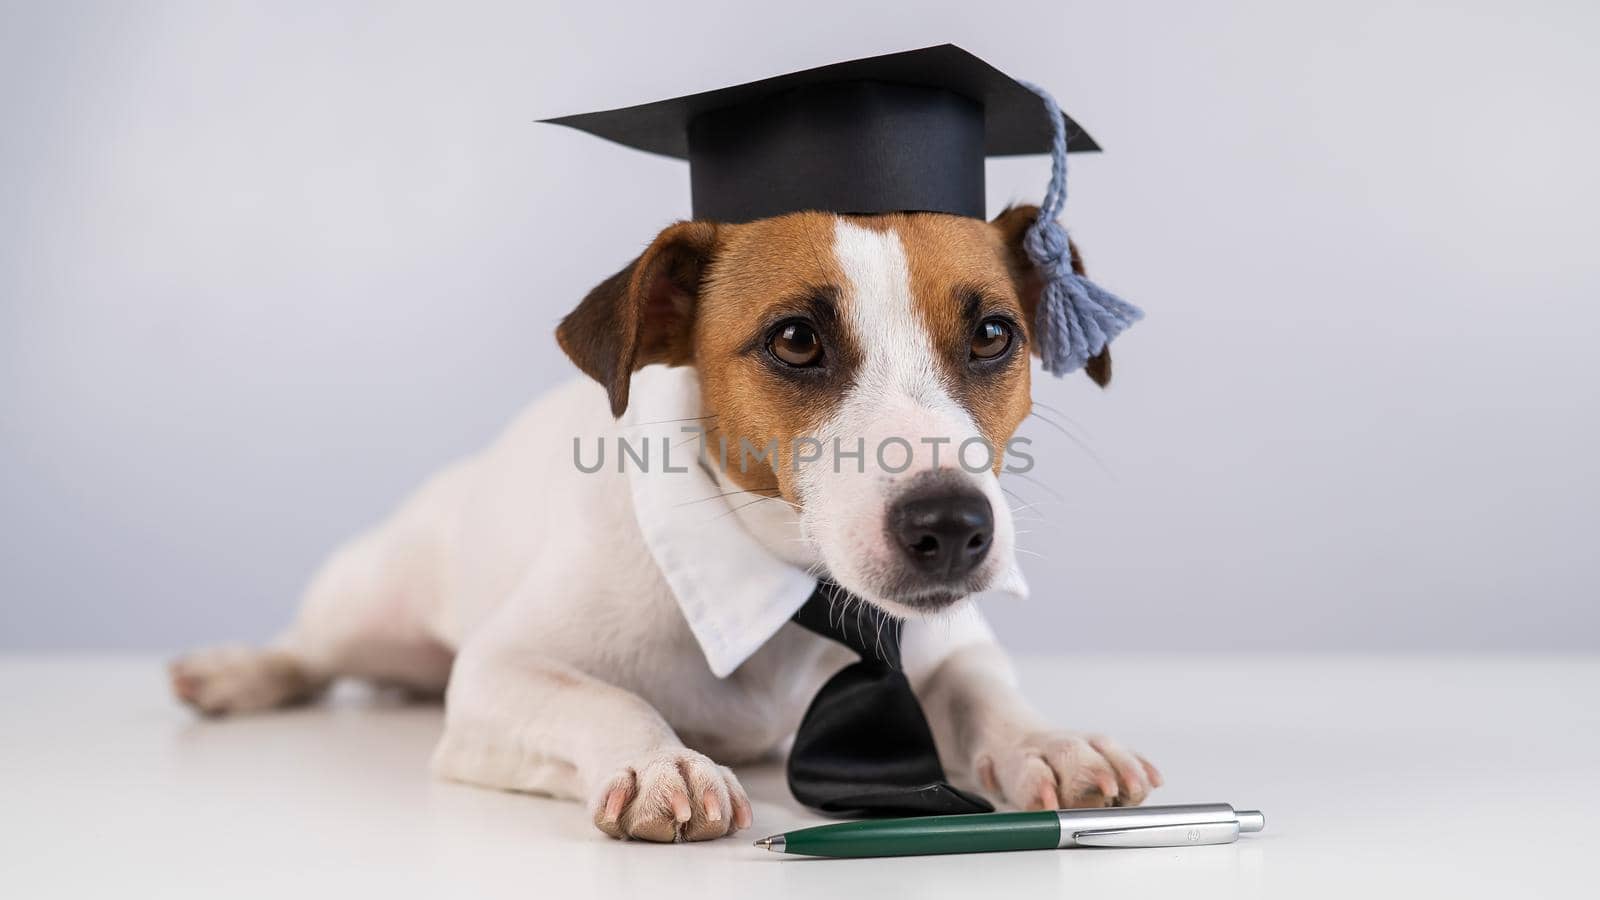 Jack Russell Terrier dog in a tie and academic cap sits on a white table